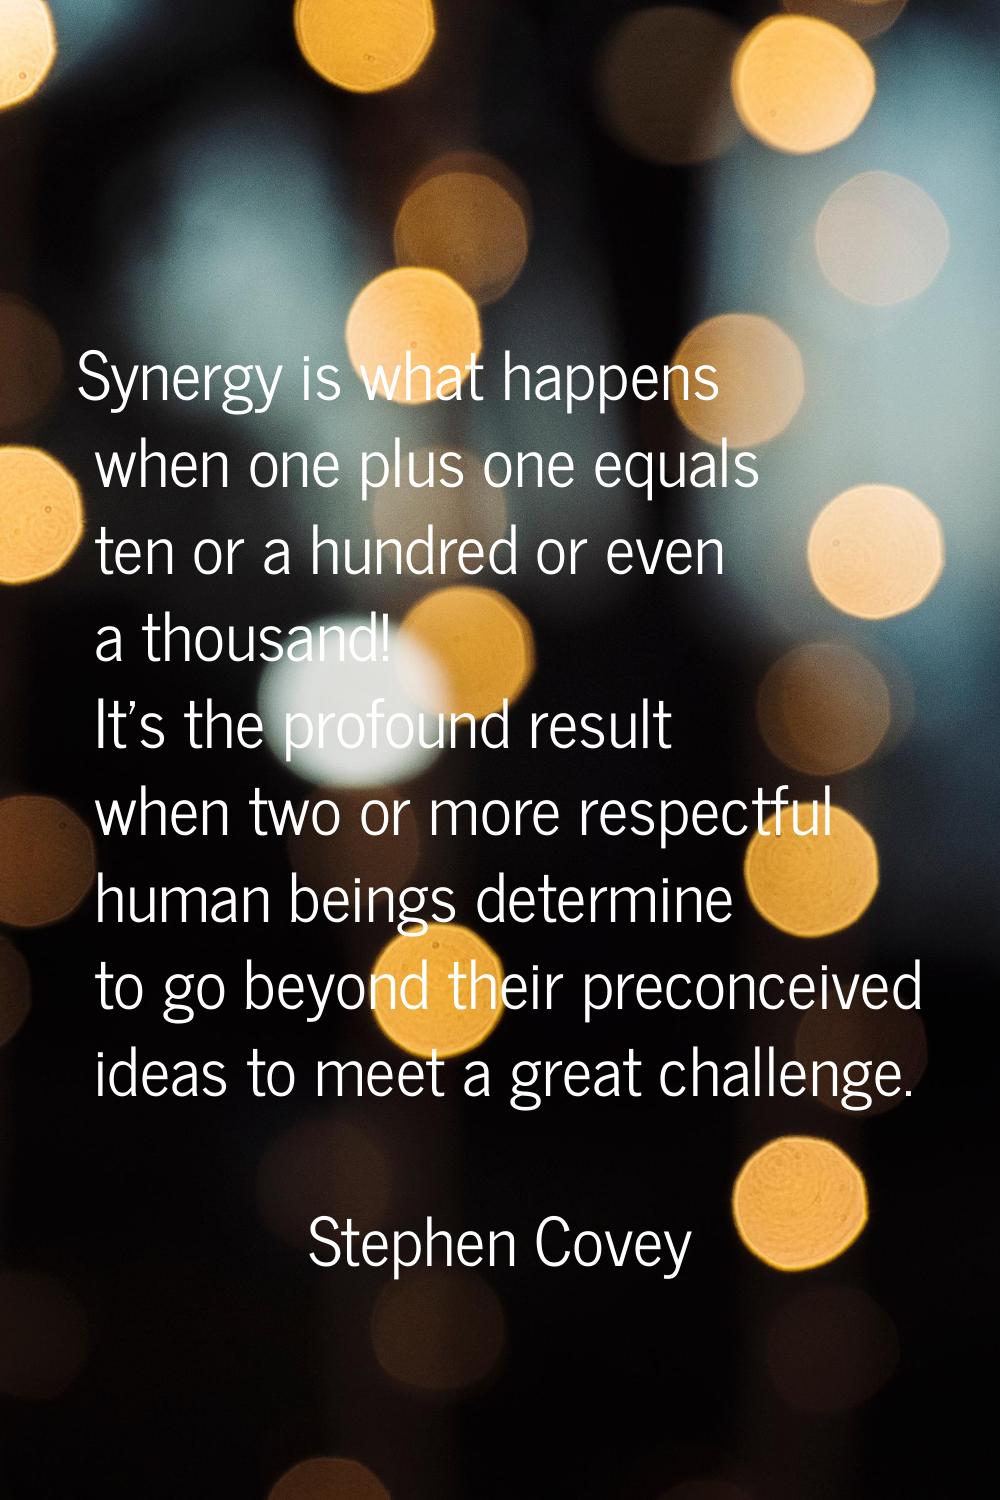 Synergy is what happens when one plus one equals ten or a hundred or even a thousand! It's the prof